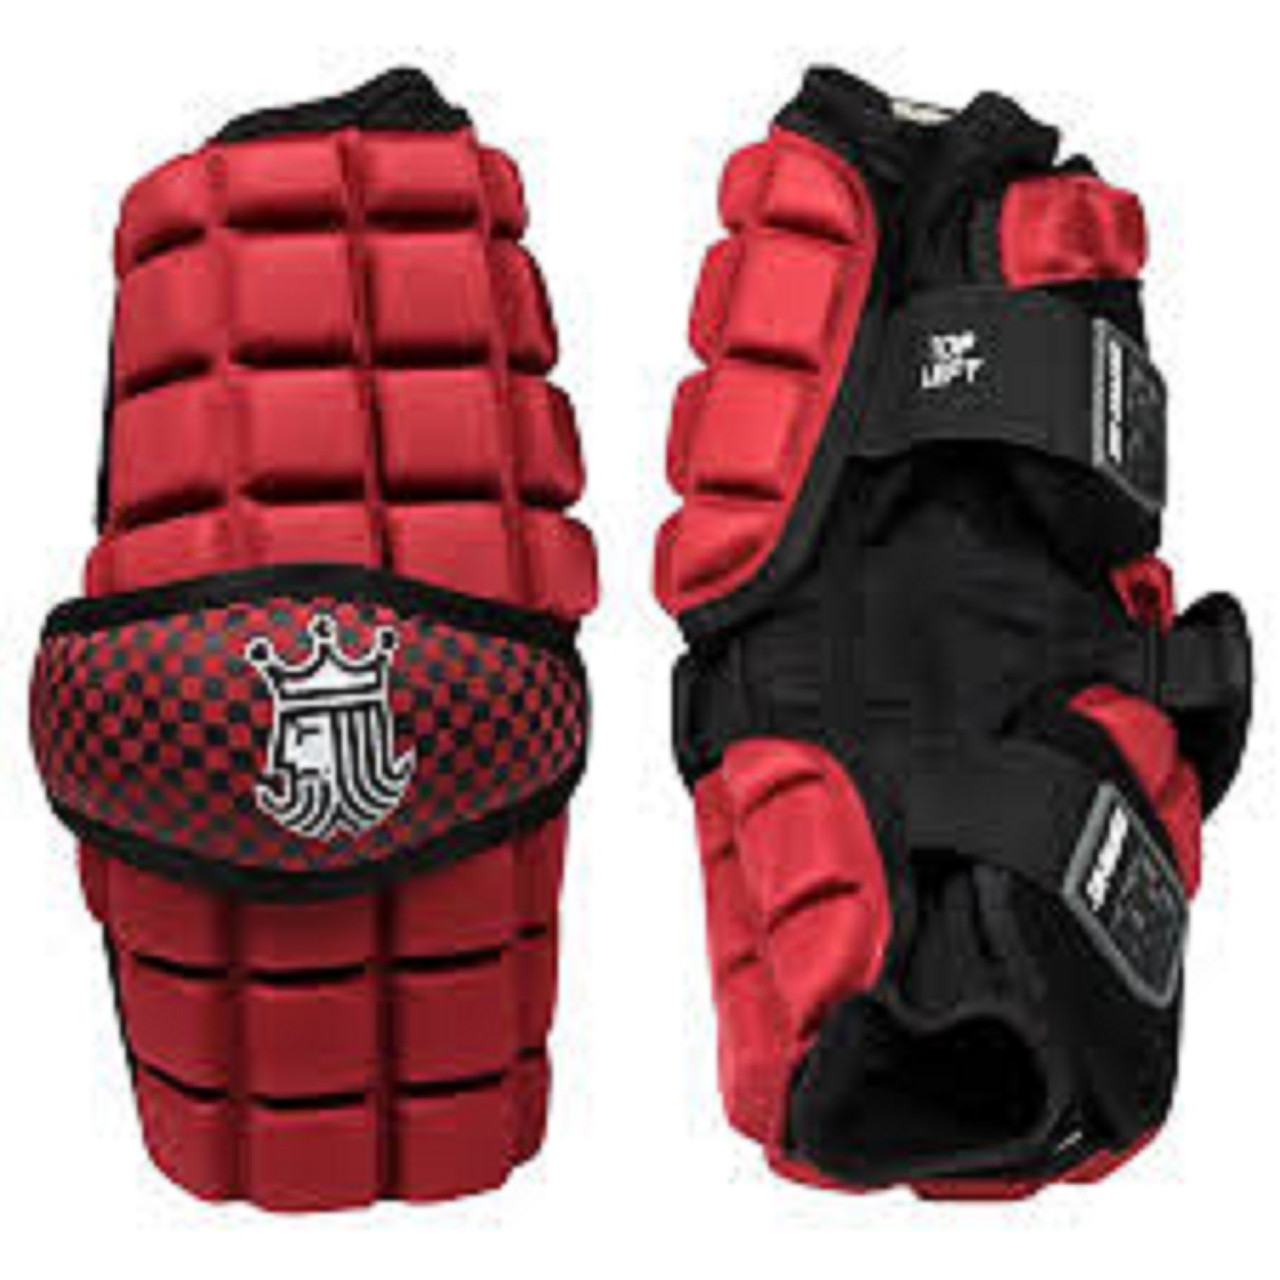 Details about   Brine Reign On Lacrosse Lopro Superlight Arm Guards Adult M Free Shipping 